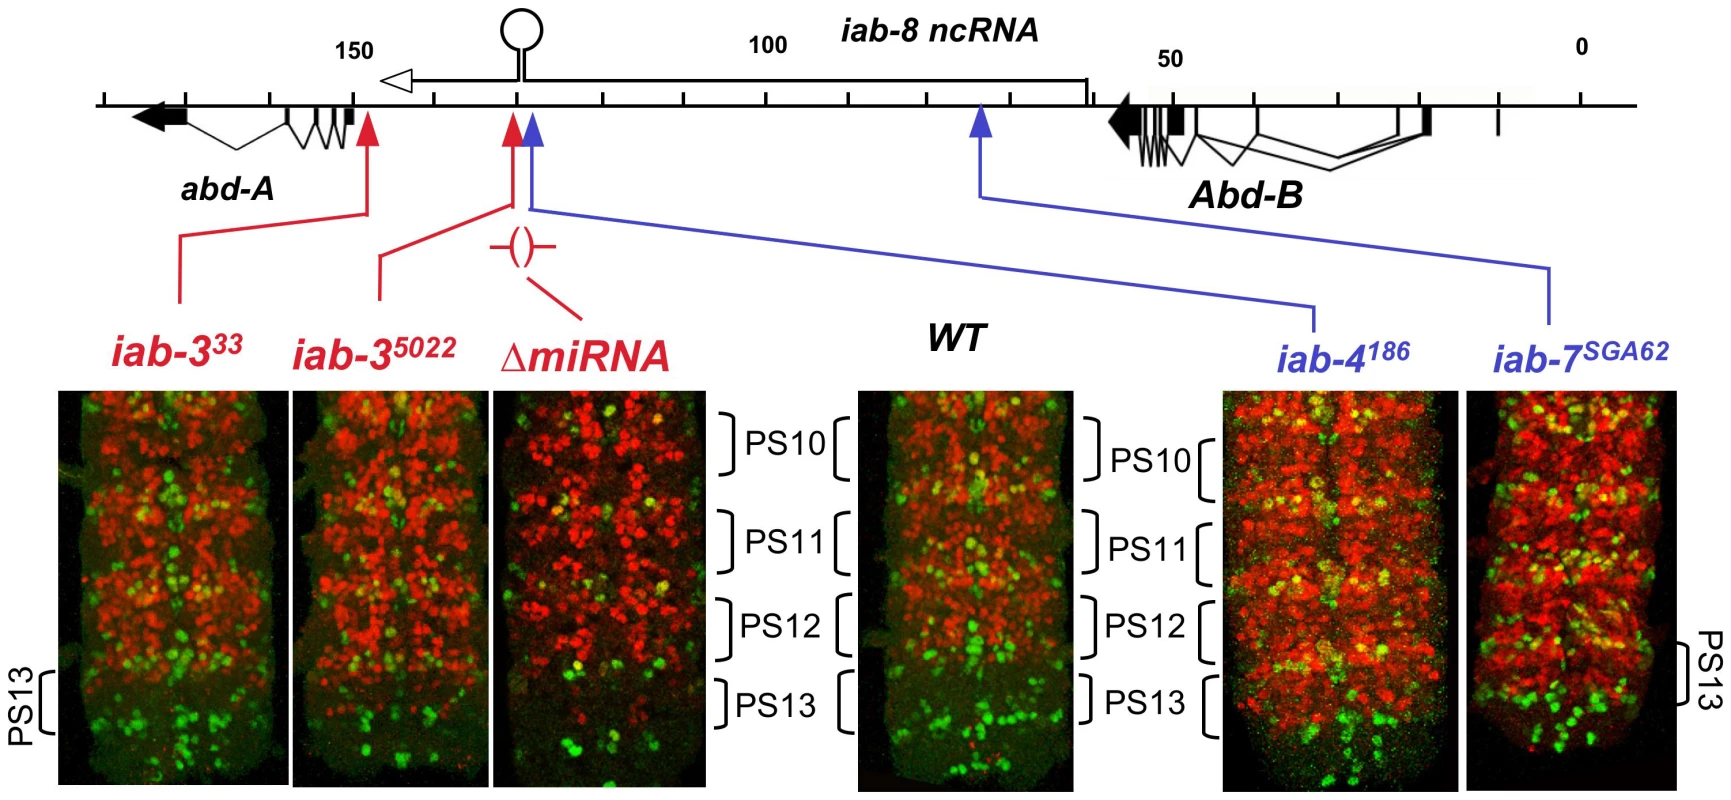 ABD-A expression in rearrangements truncating the iab-8 ncRNA.